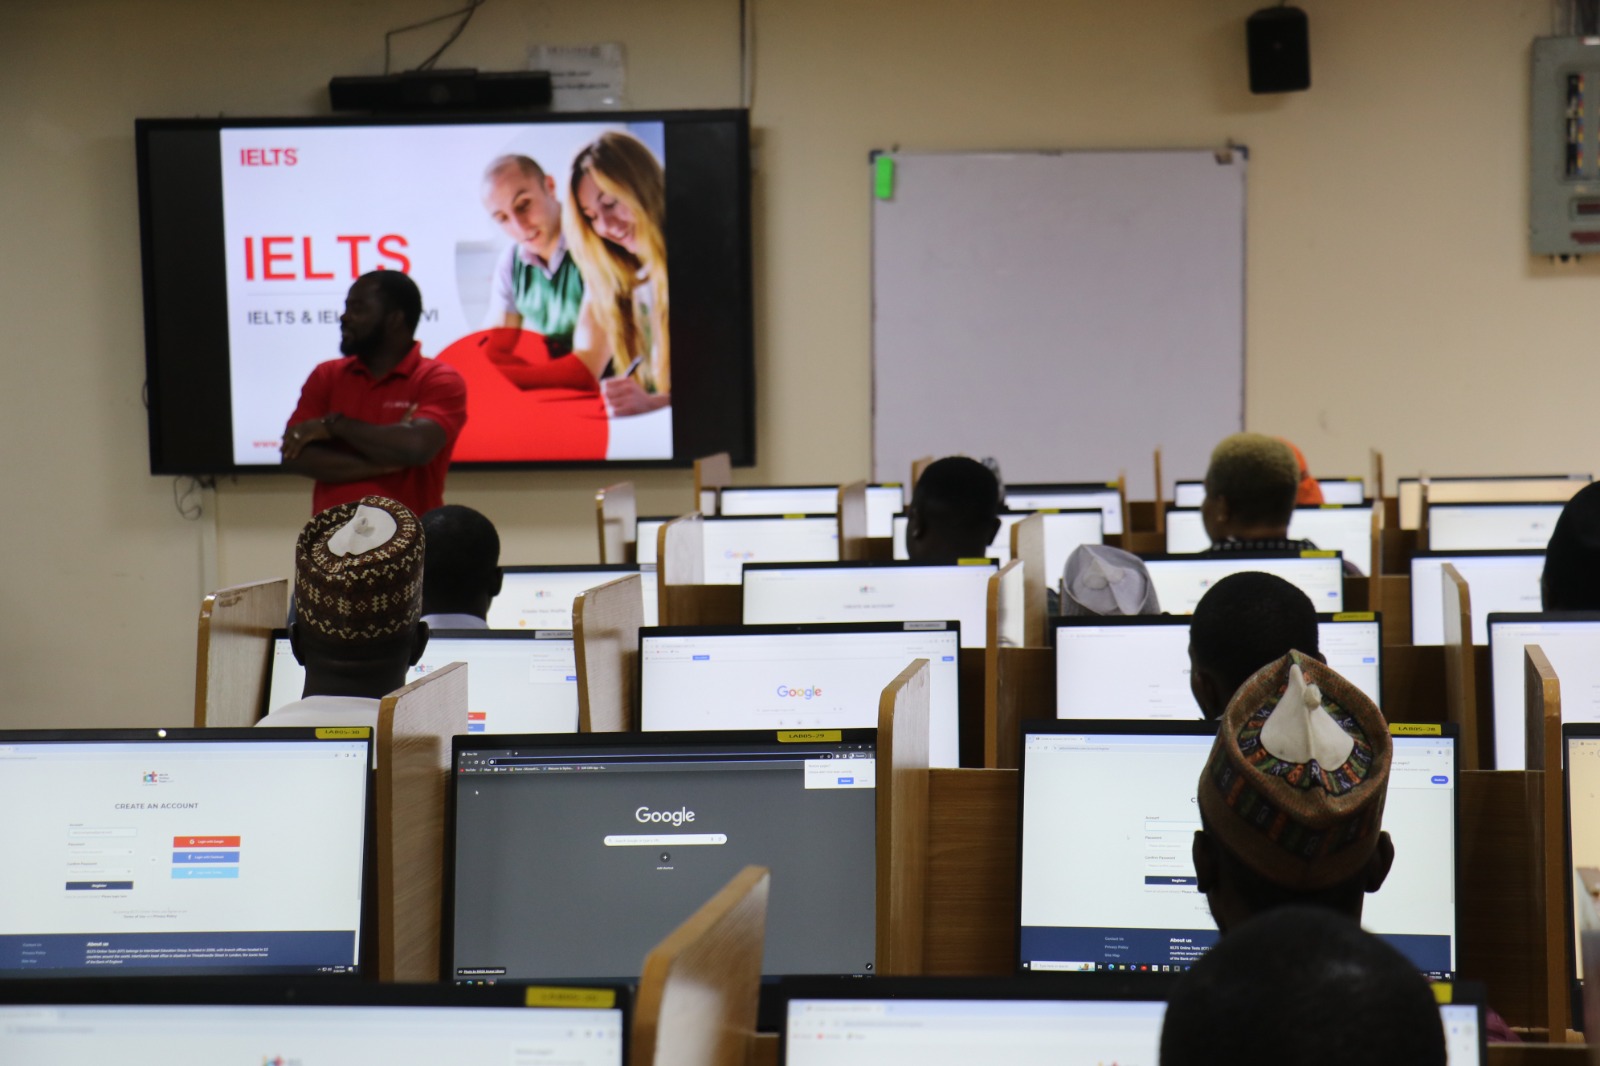 SUN IELTS Test Center conducts Open Day for Prospective Candidates